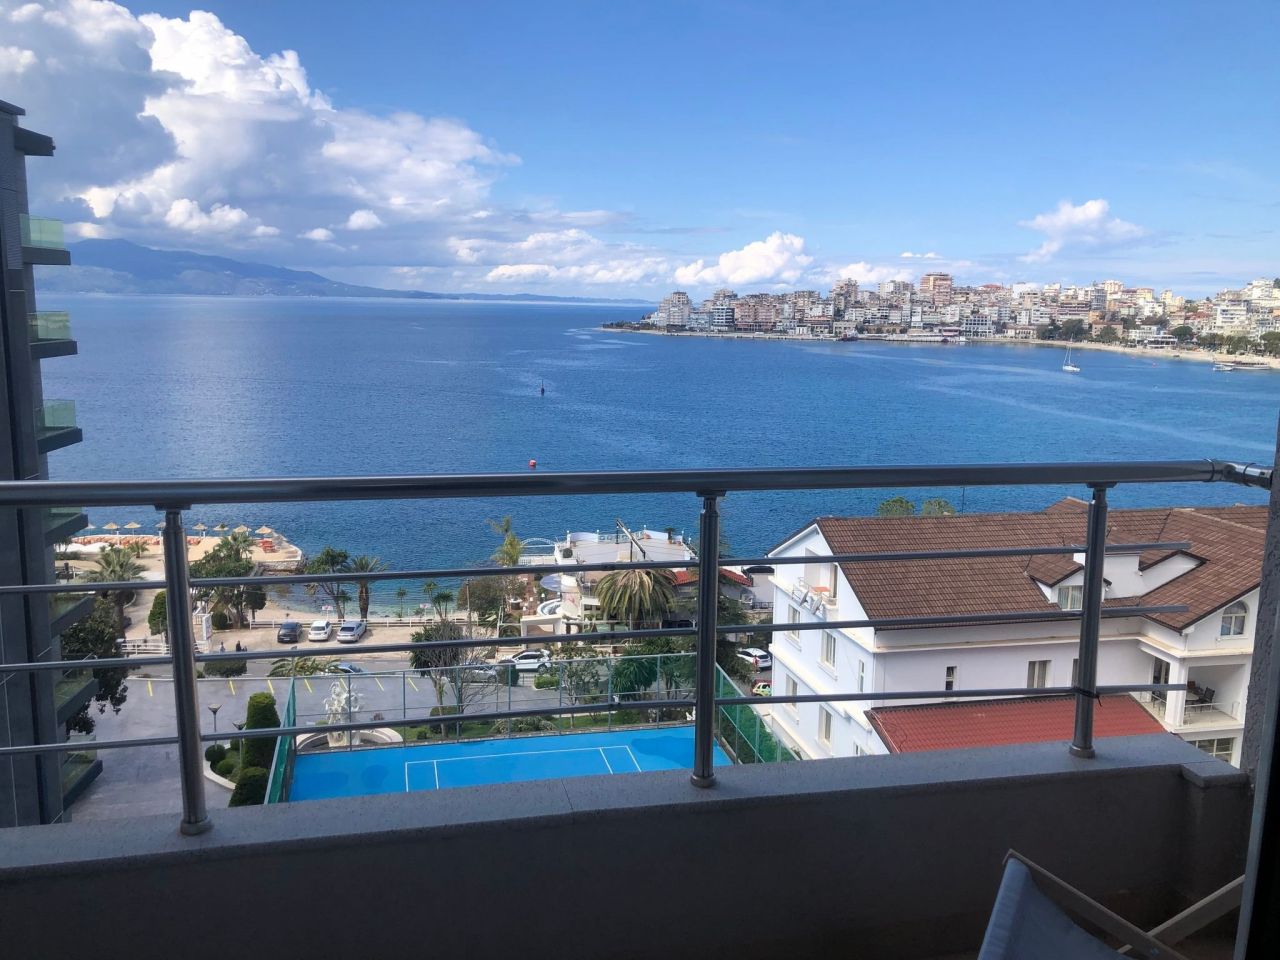 Rent Holiday Apartment in Sarande. Enjoy Vacation in Albania.